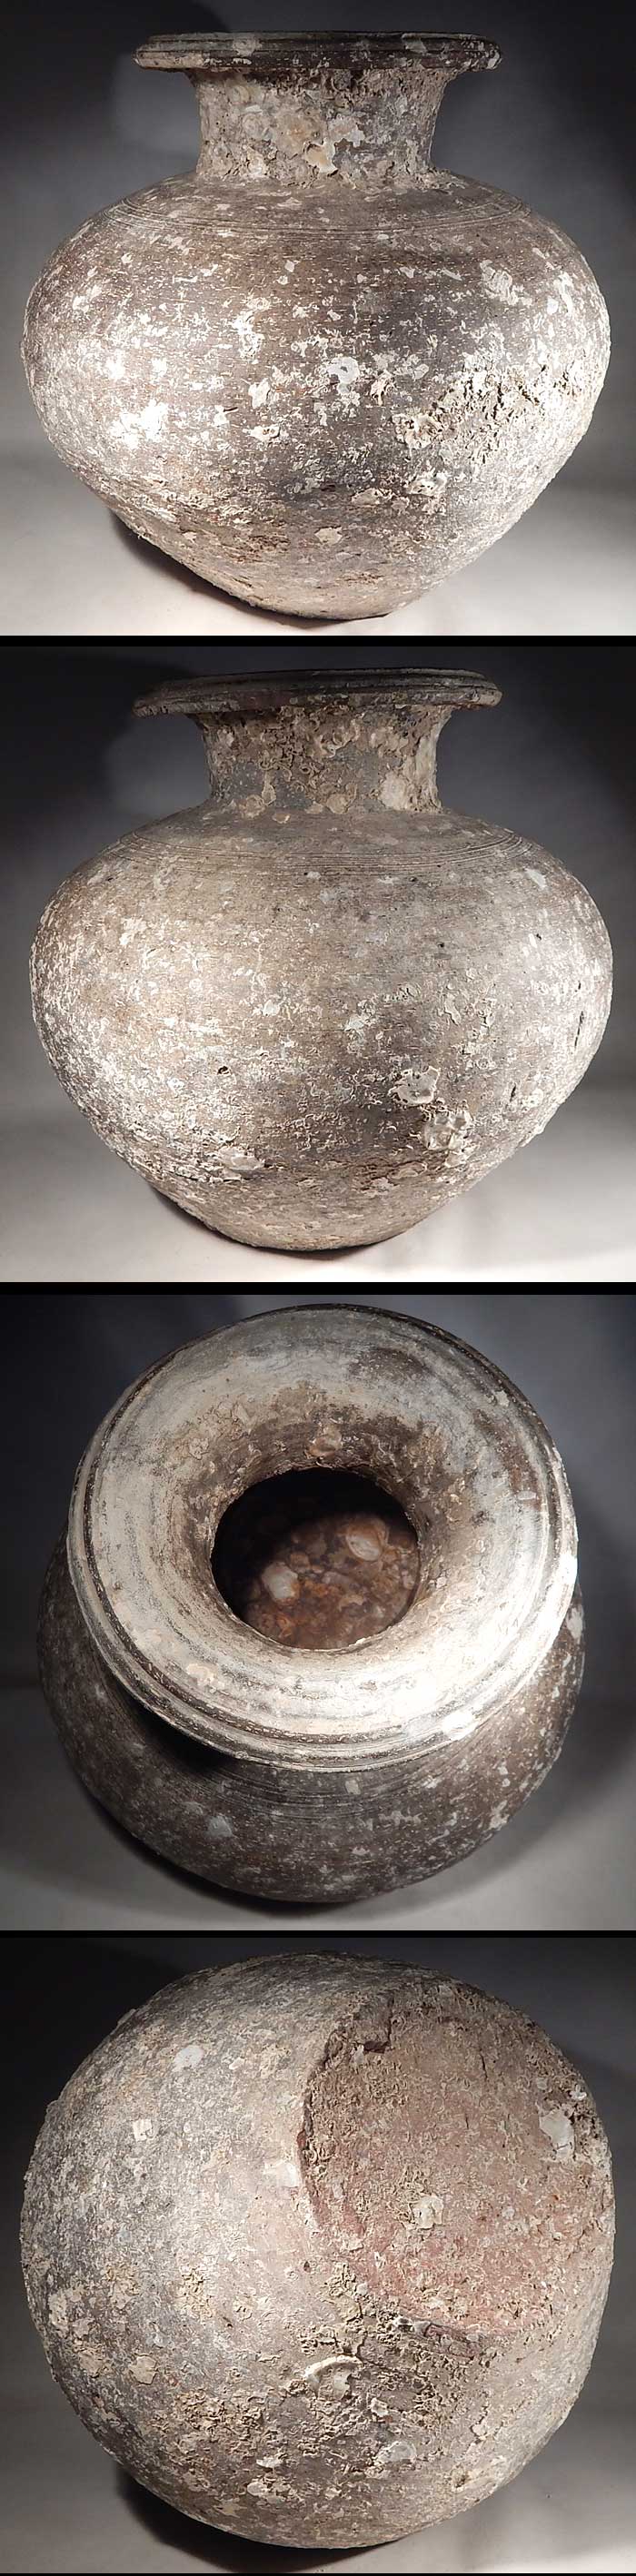 Chinese Yuan - Ming Dynasty Terracotta Pottery Sea Encrusted Salvage Vessel